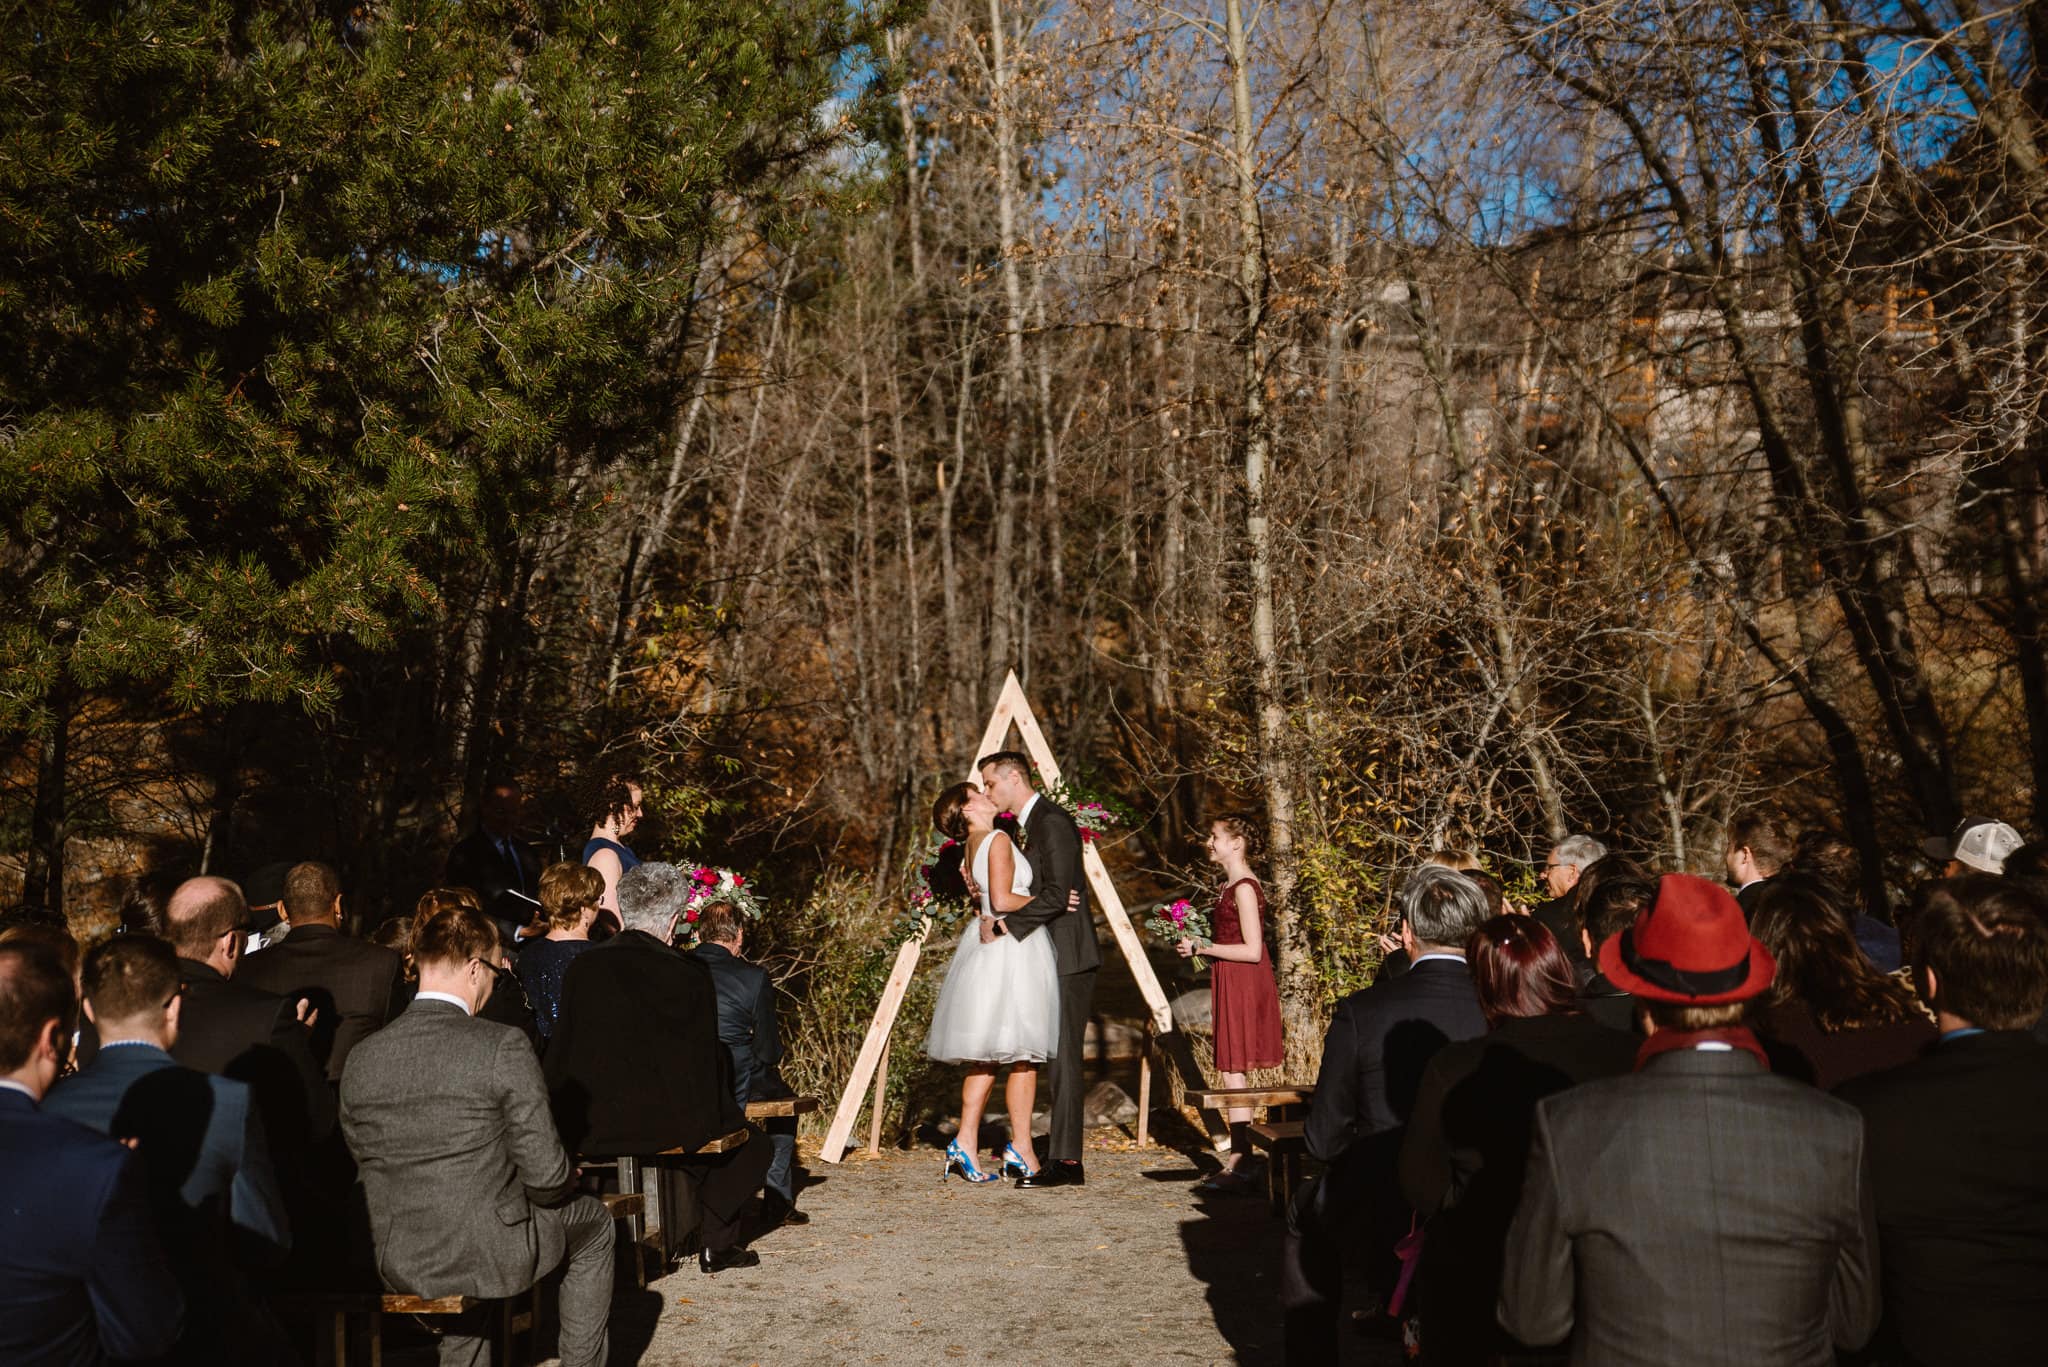 Silverthorne Pavilion wedding ceremony, Colorado wedding photographer, outdoor wedding ceremony, Colorado mountain wedding venues, bride and groom first kiss